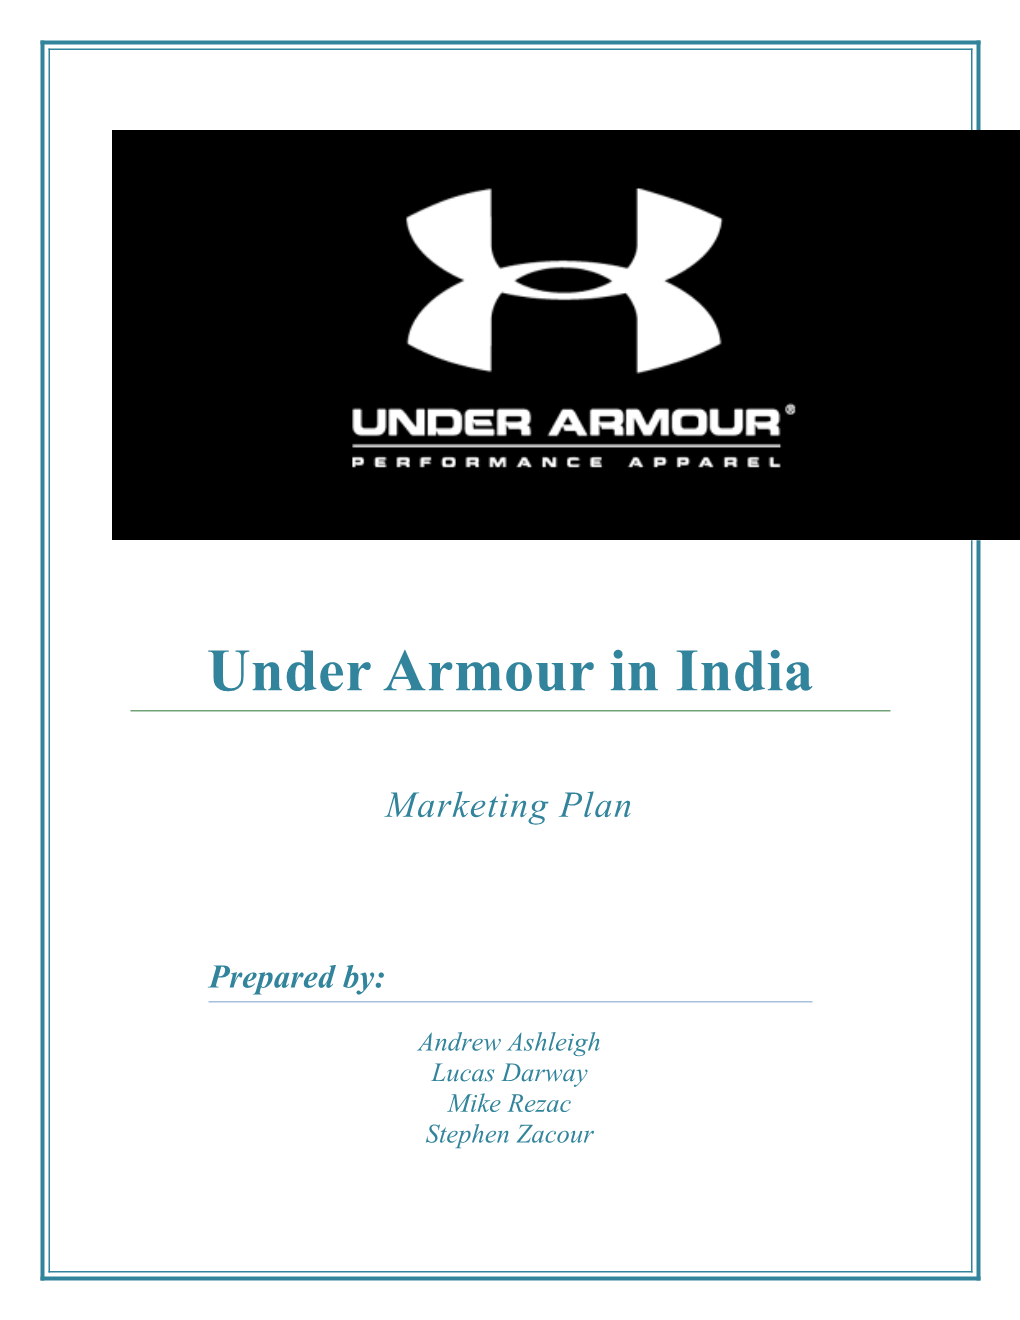 Under Armour in India